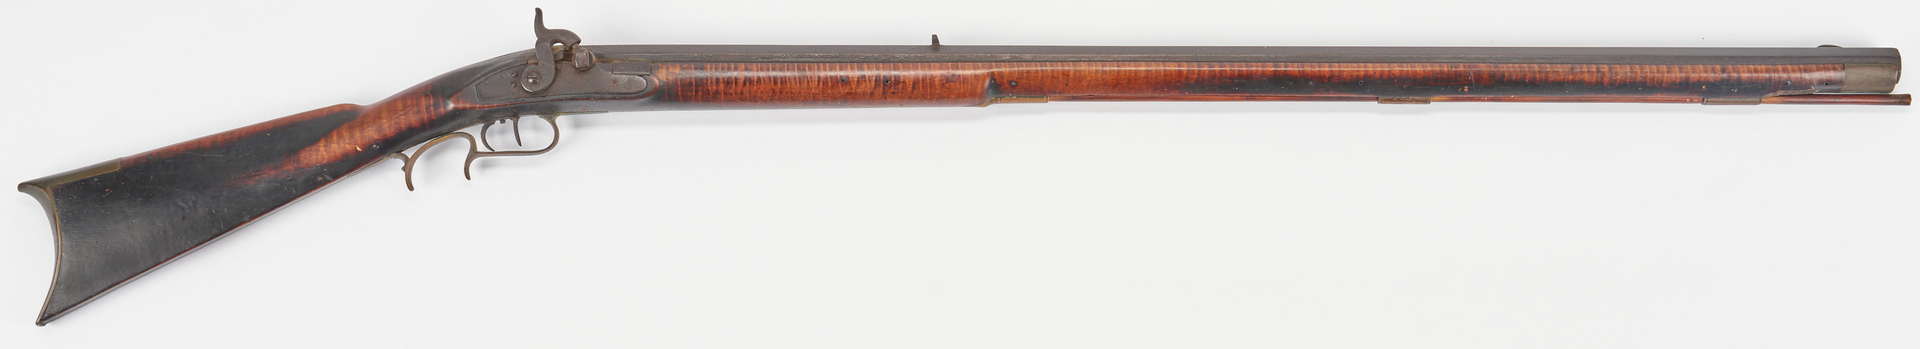 Lot 619: Mid-Atlantic or Southern Tiger Maple Long Rifle